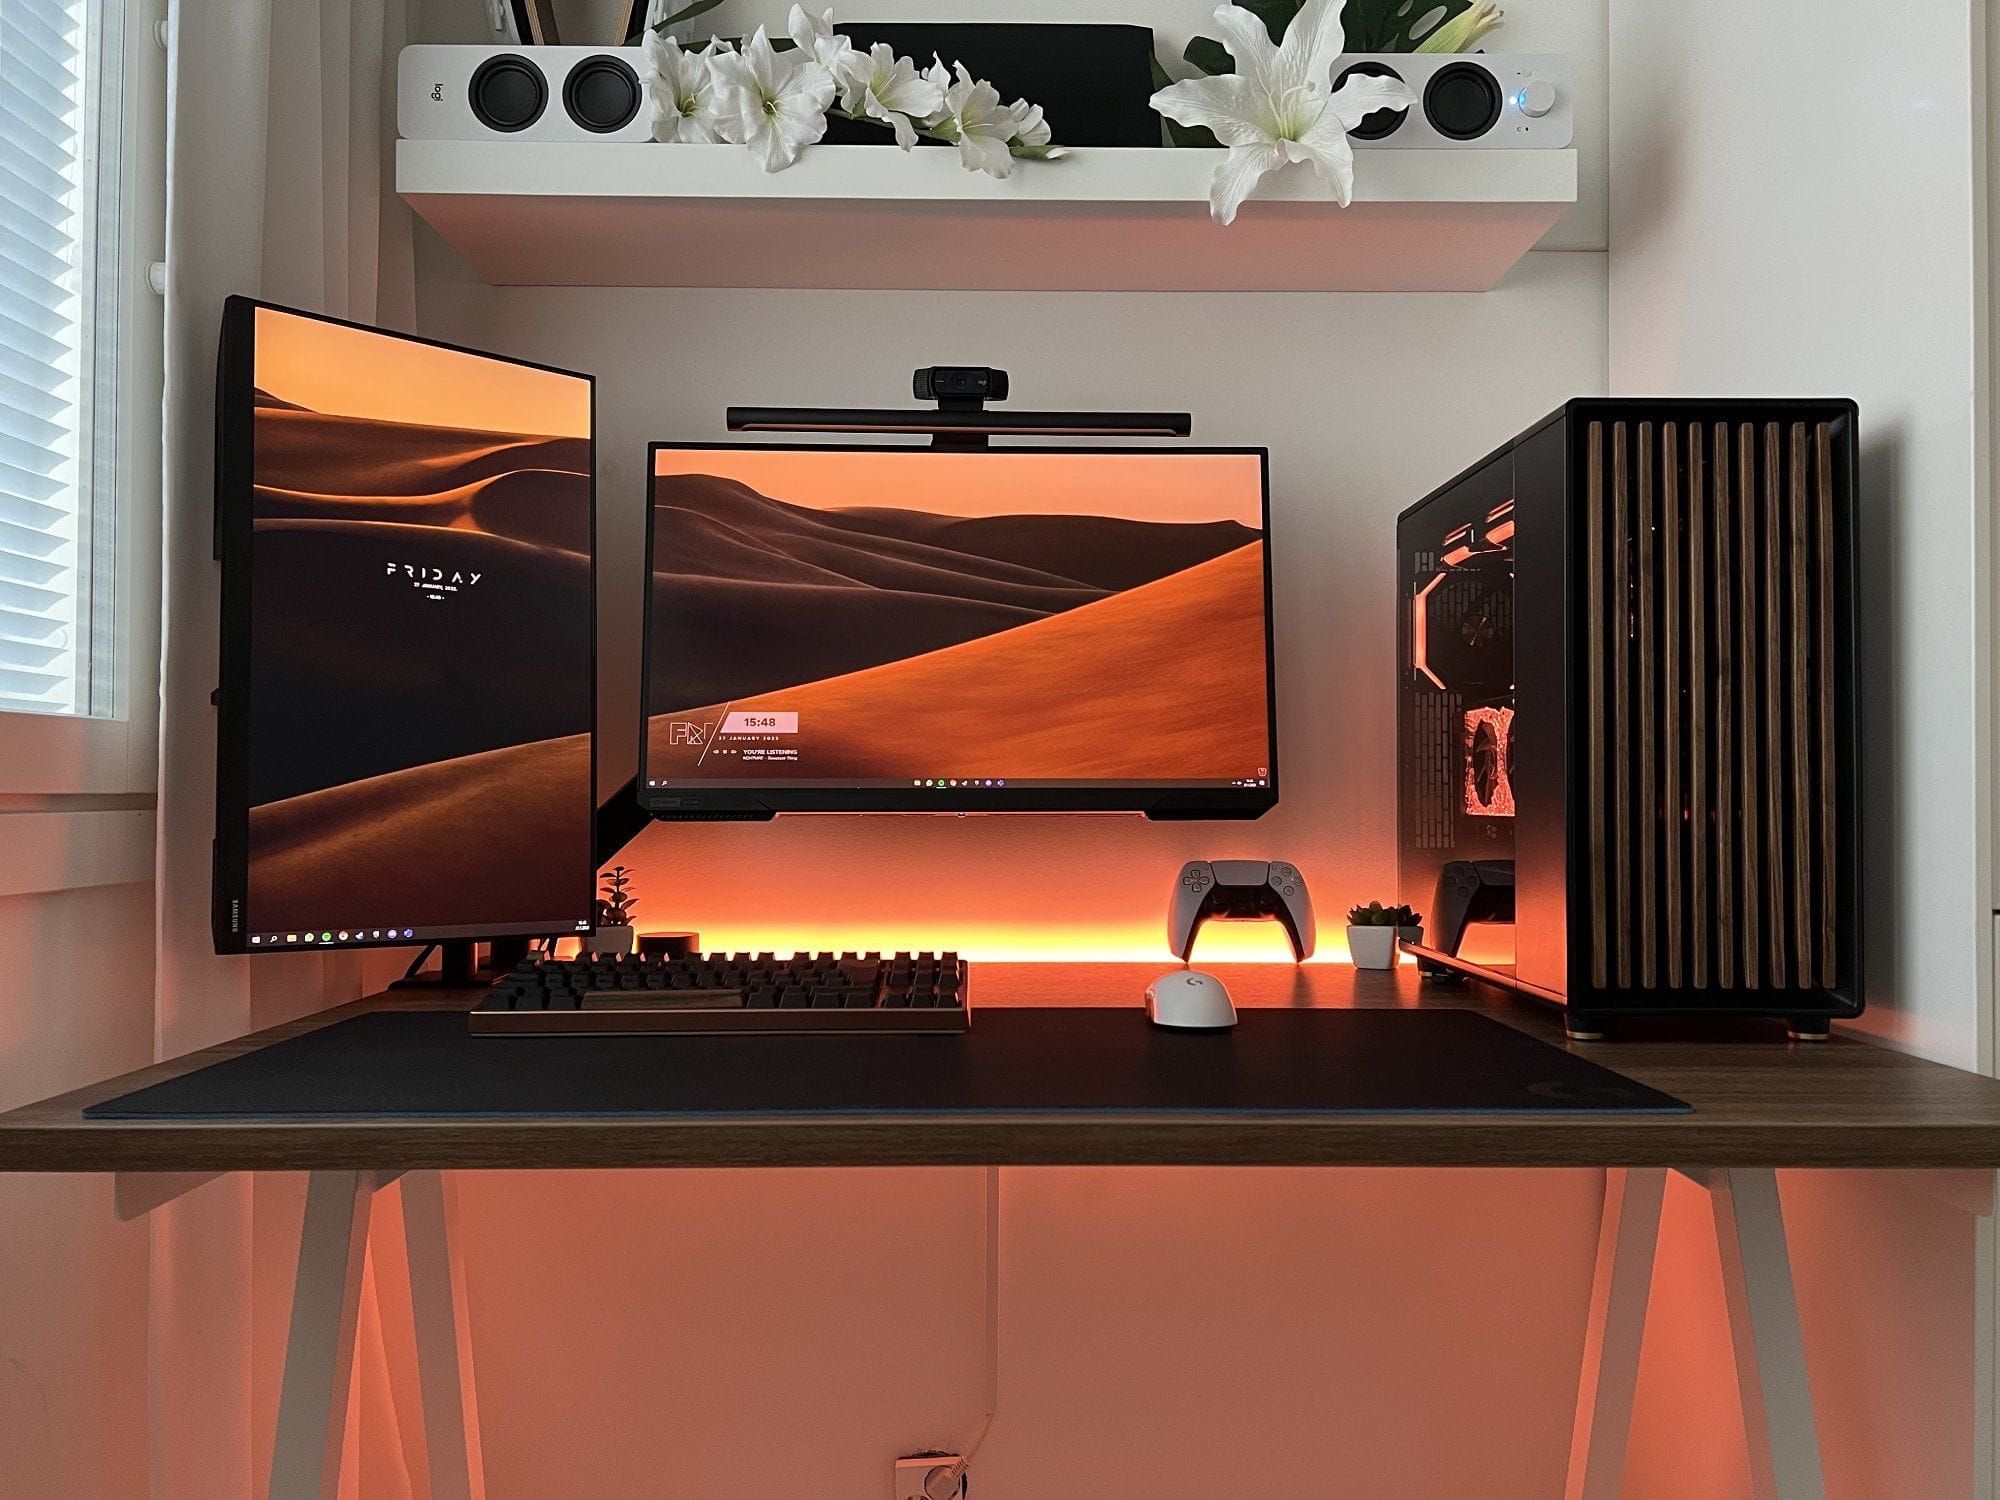 A sleek desk setup featuring two monitors with matching wallpapers, a high-end PC tower, mechanical keyboard, and mouse, with decorative plants and speakers under soft ambient lighting